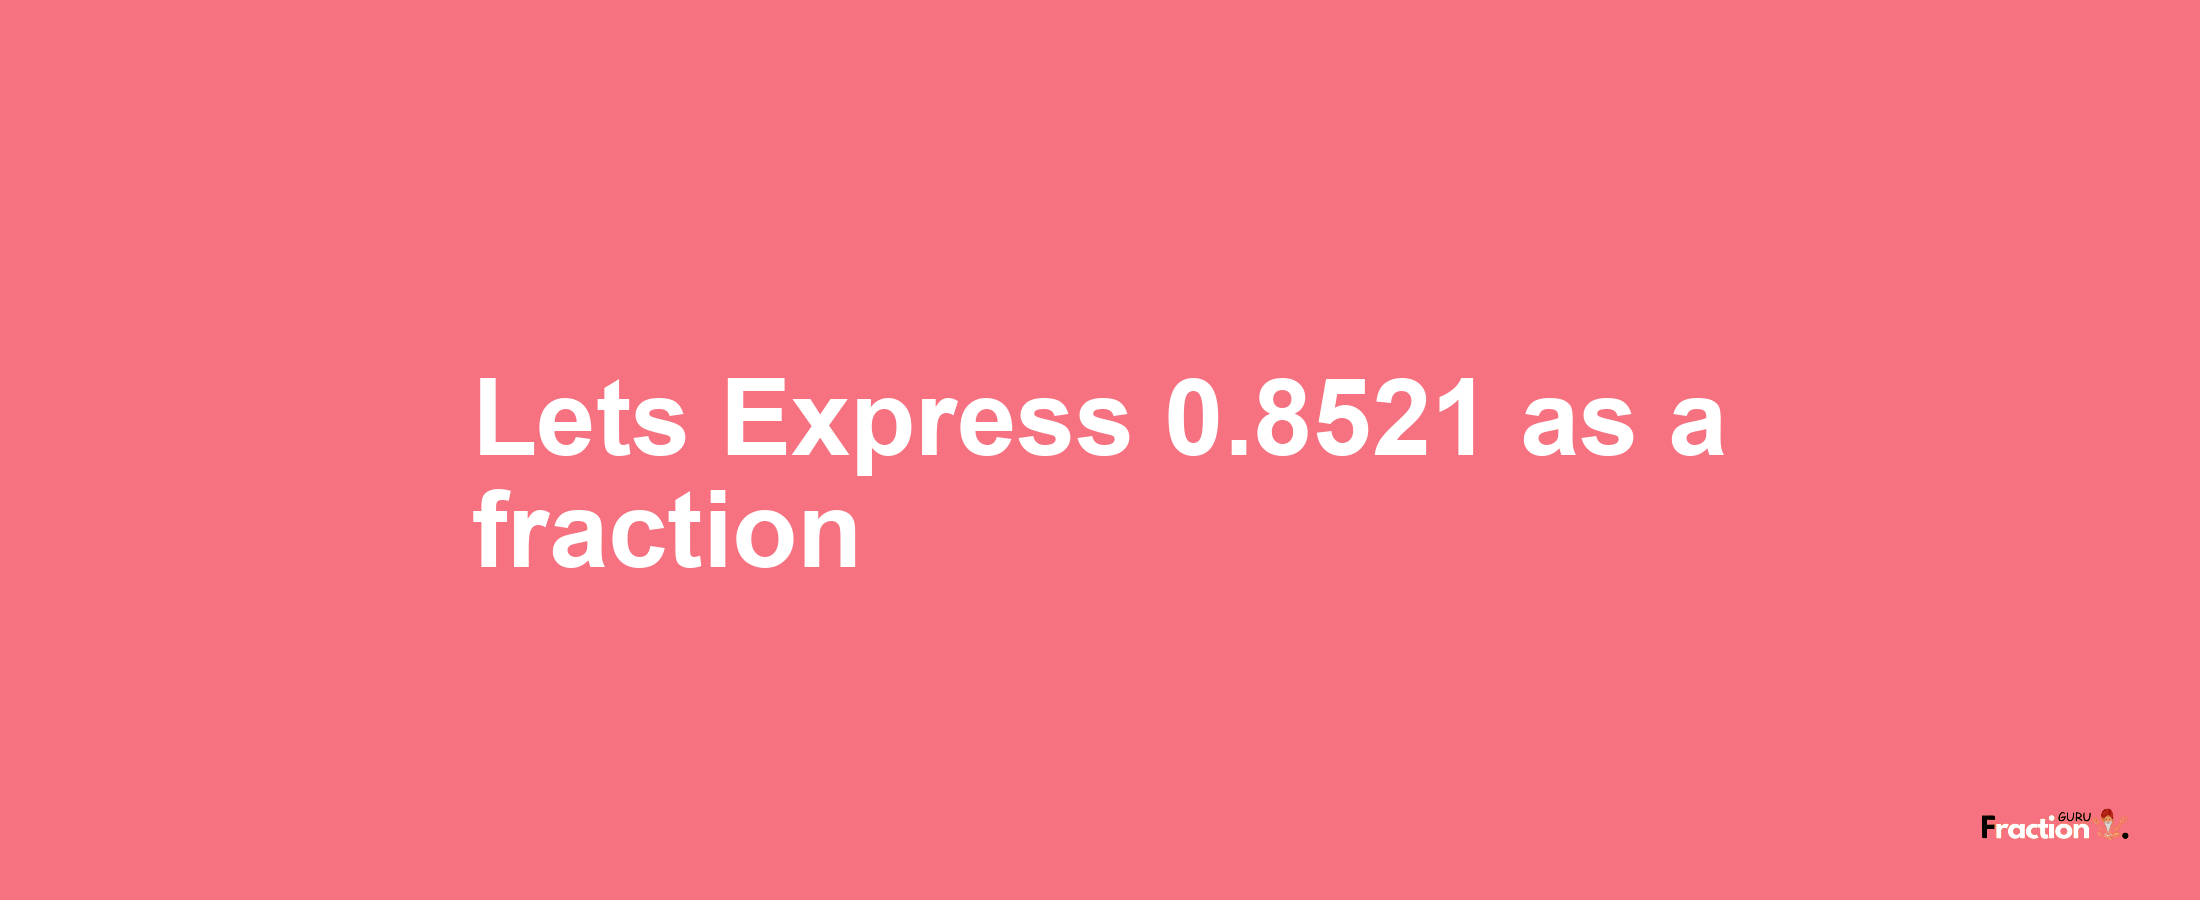 Lets Express 0.8521 as afraction